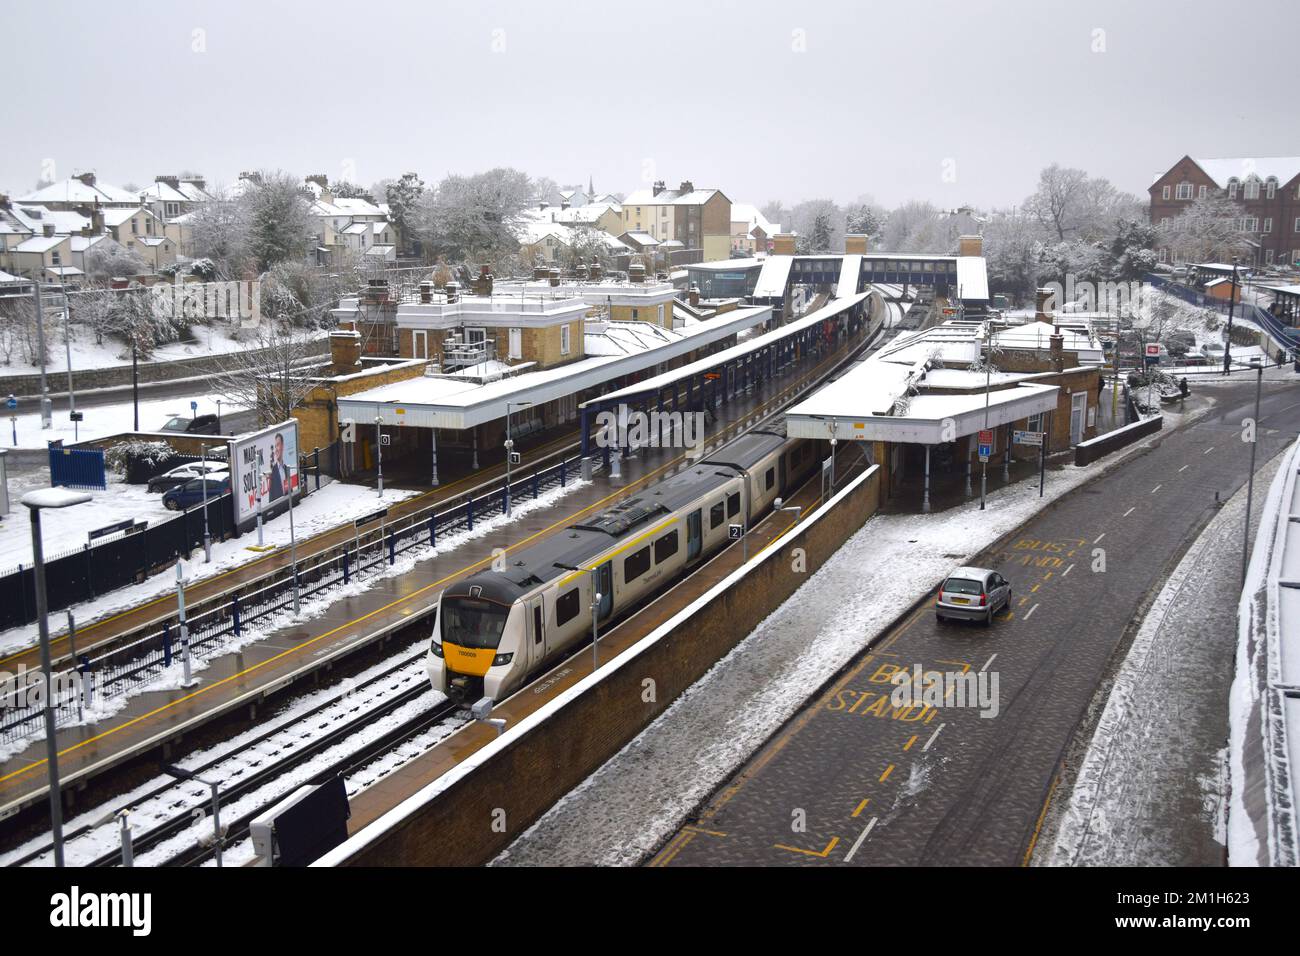 The Kent town of Gravesend’s residents awoke to an extensive overnight fall of snow and freezing temperatures. Image shows Gravesend Railway Station. Stock Photo